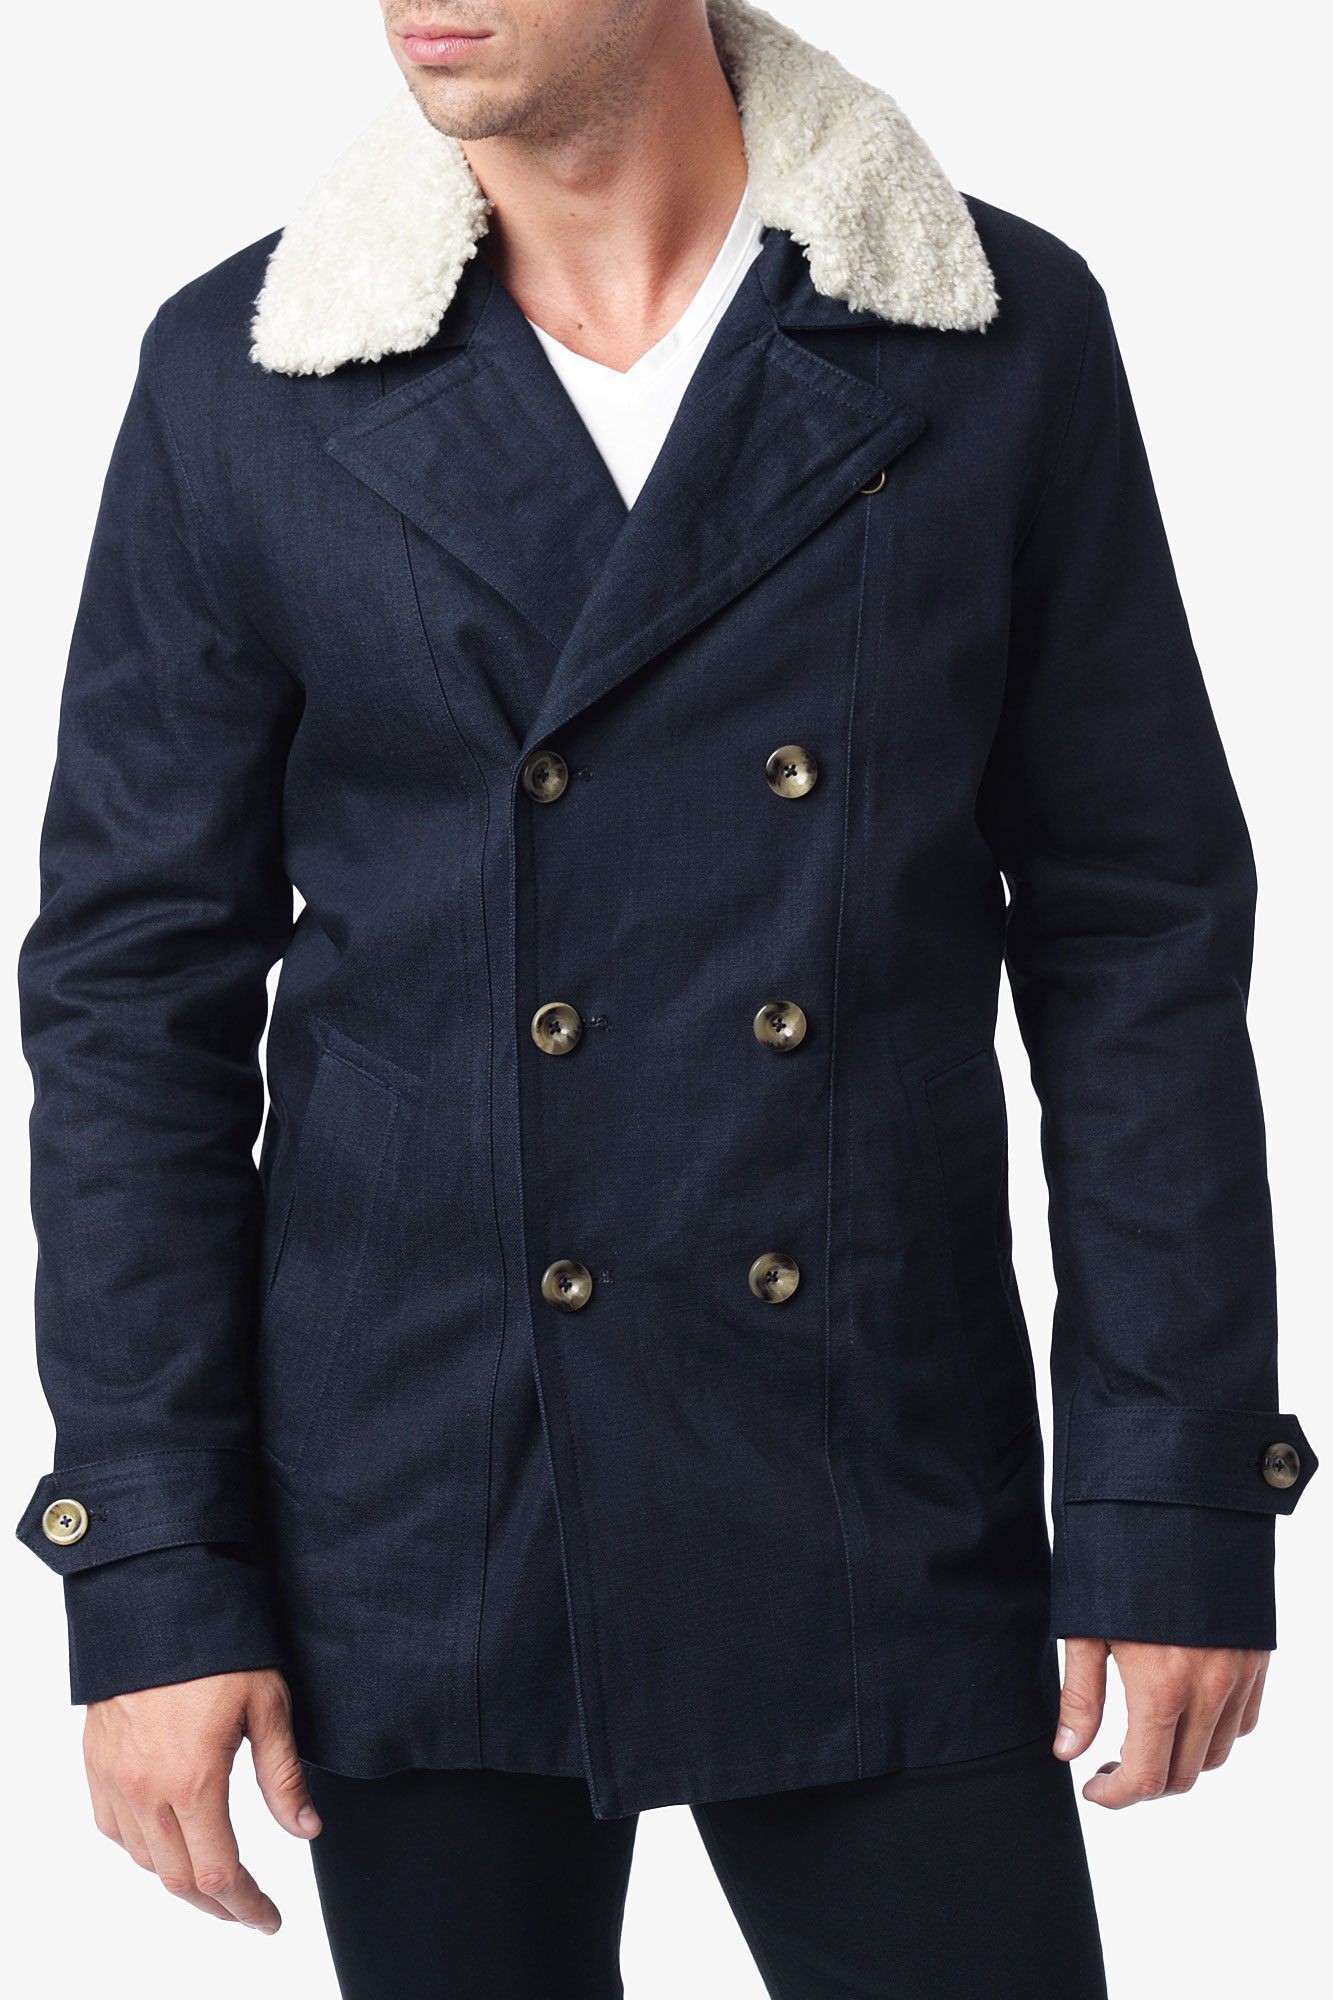 Lyst - 7 For All Mankind Fur Collar Peacoat in Blue for Men